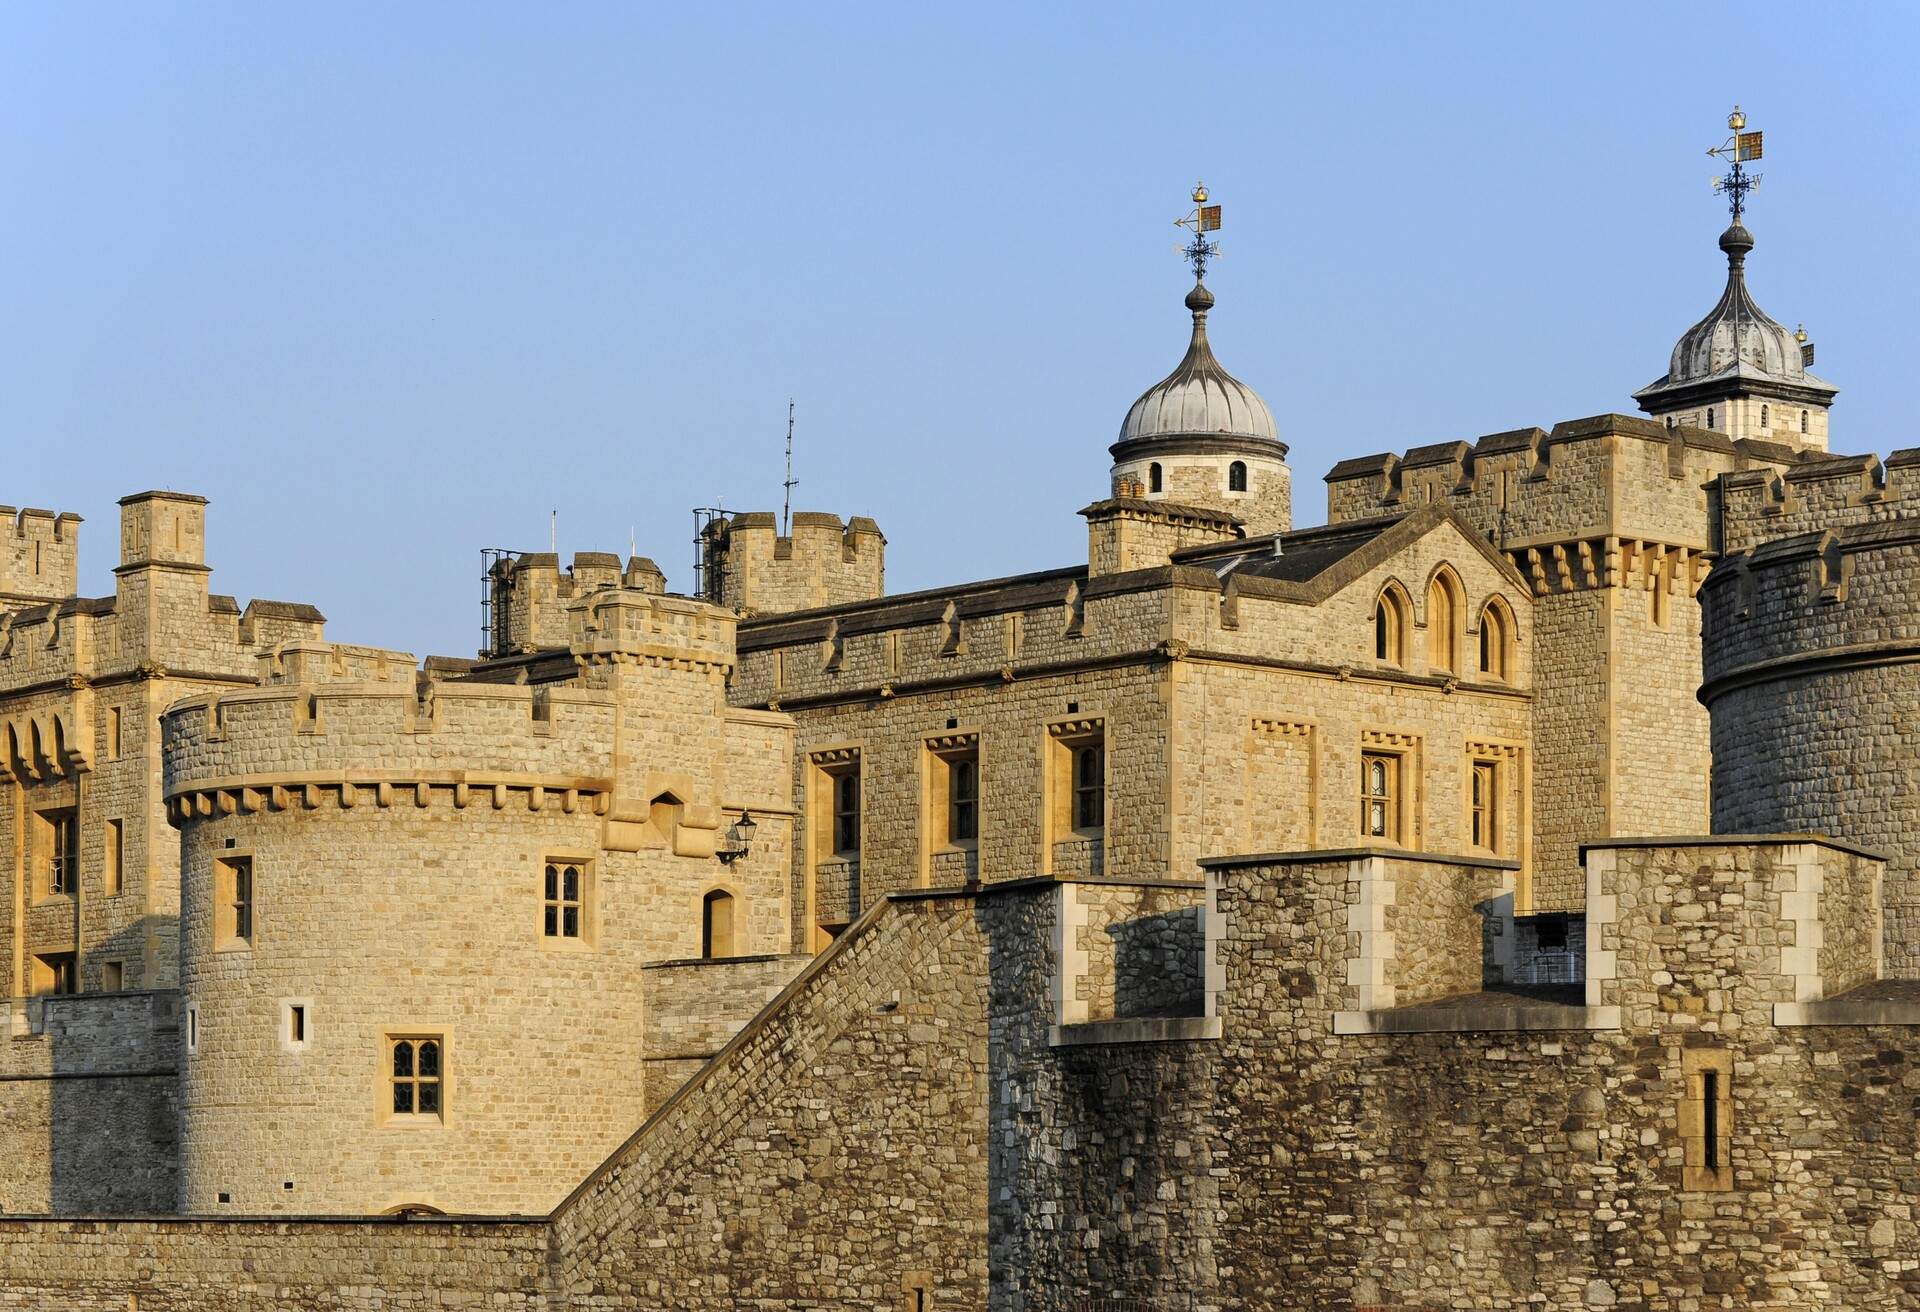 Tower of London, UNESCO World Cultural Heritage site, London, England, United Kingdom